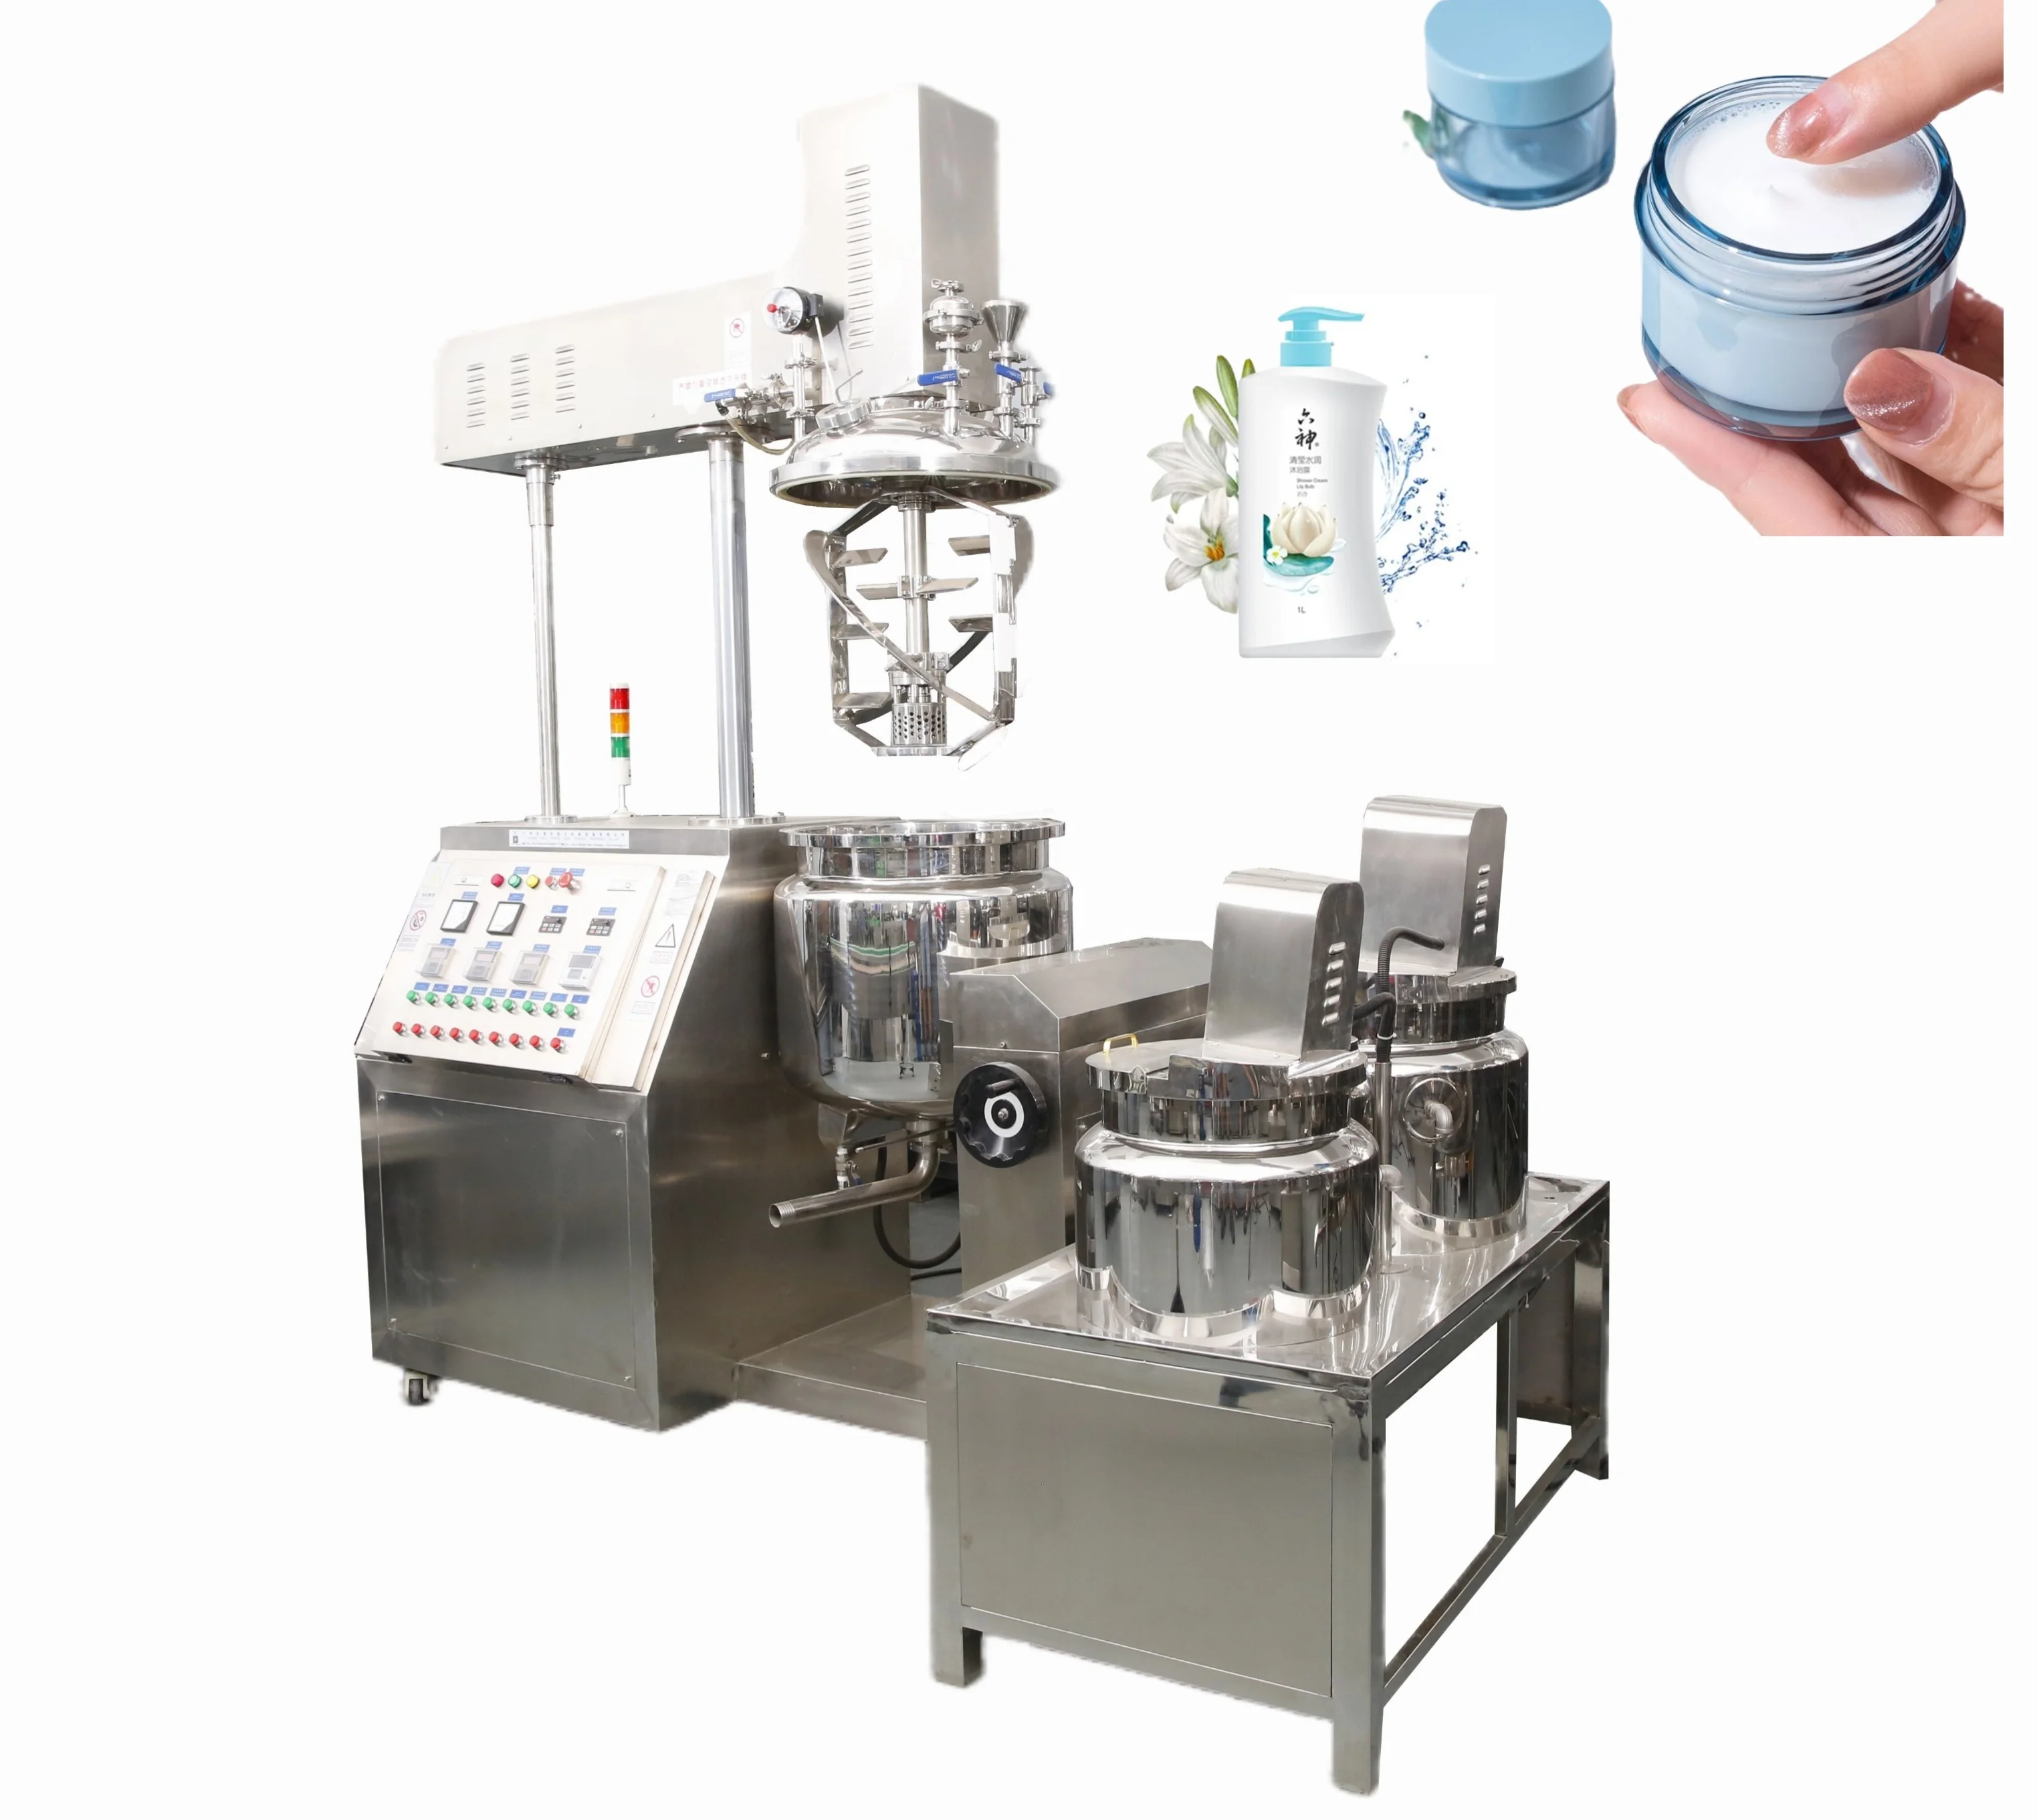 Vacuum homogenizer mixer high shear with tank machines for the manufacture of cosmetics homogenizer mixer